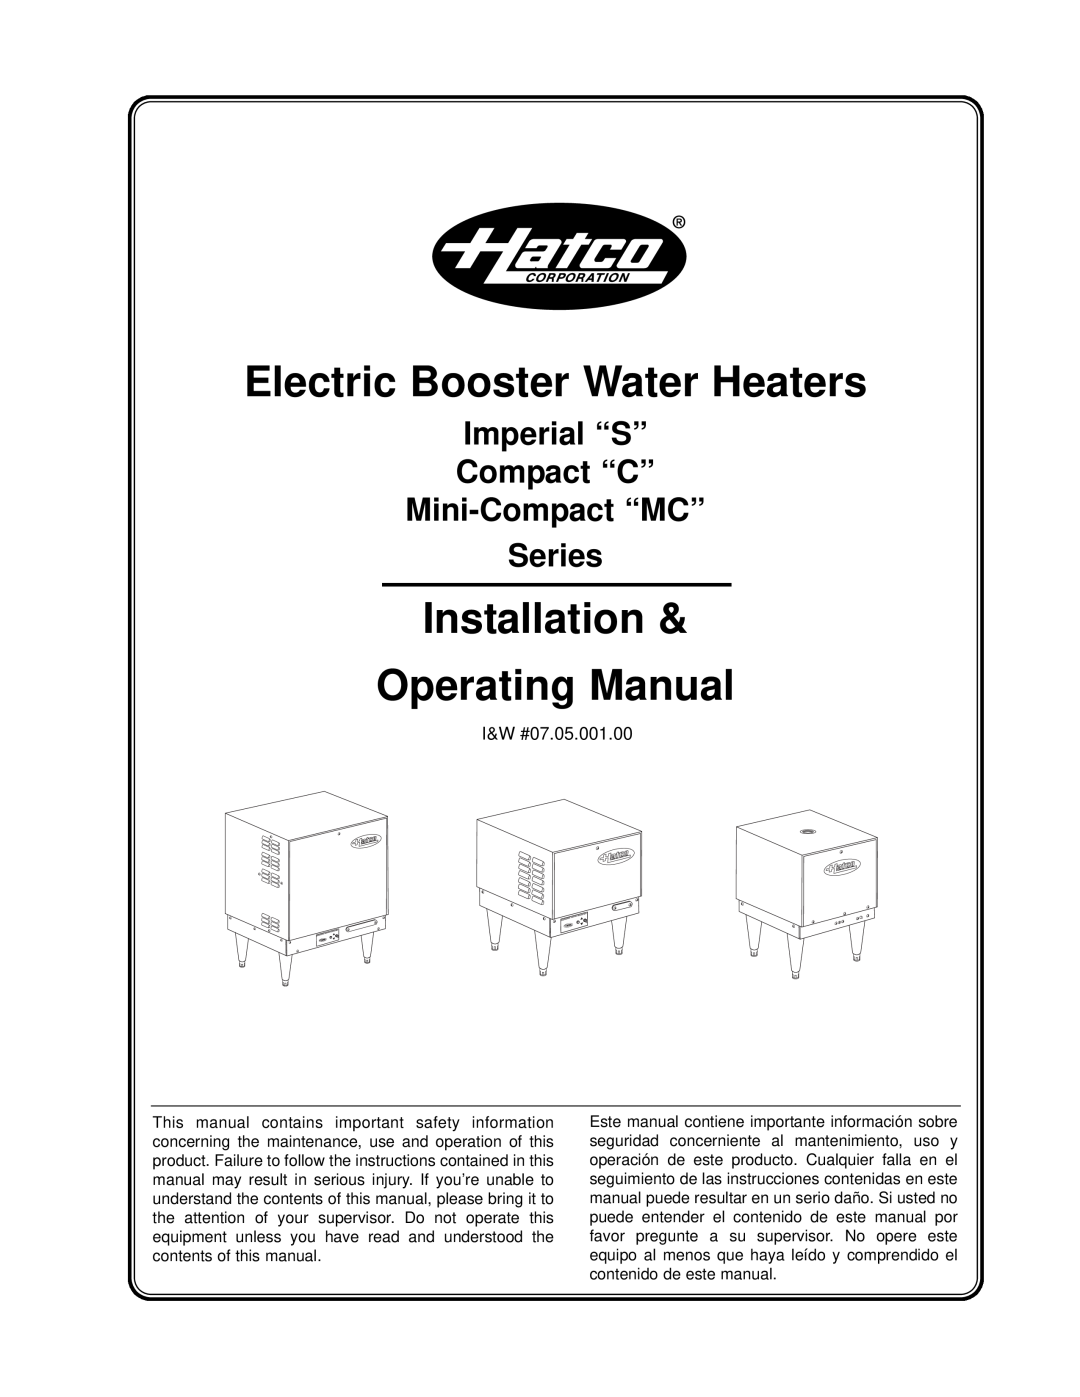 Hatco IMPERIAL "S manual Electric Booster Water Heaters, Installation & Operating Manual 